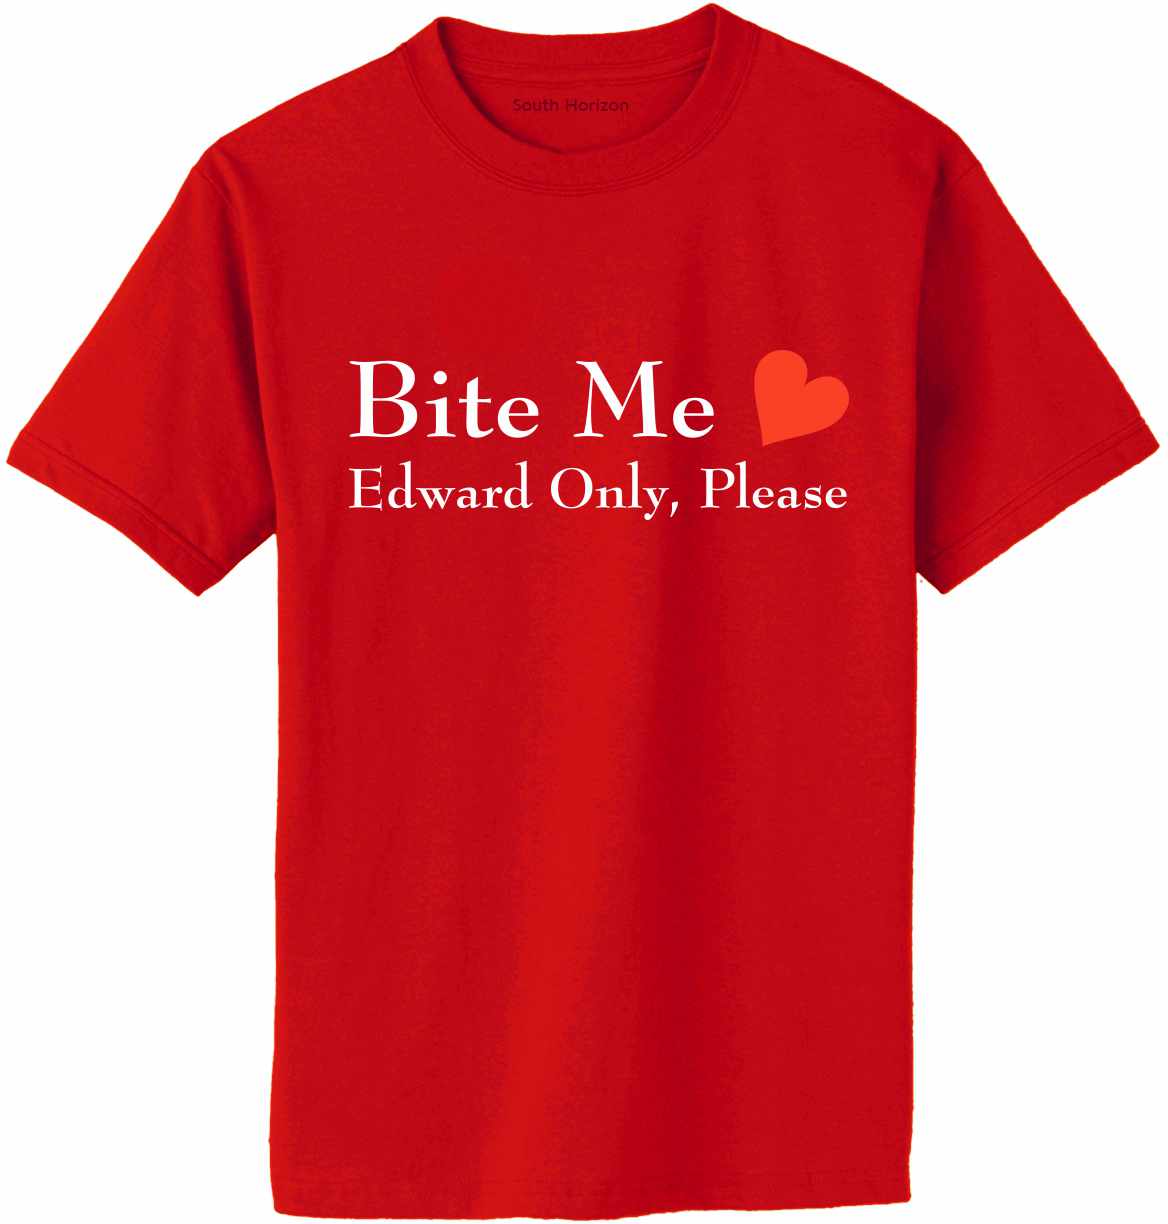 BITE ME, Edward Only Please on Adult T-Shirt (#516-1)